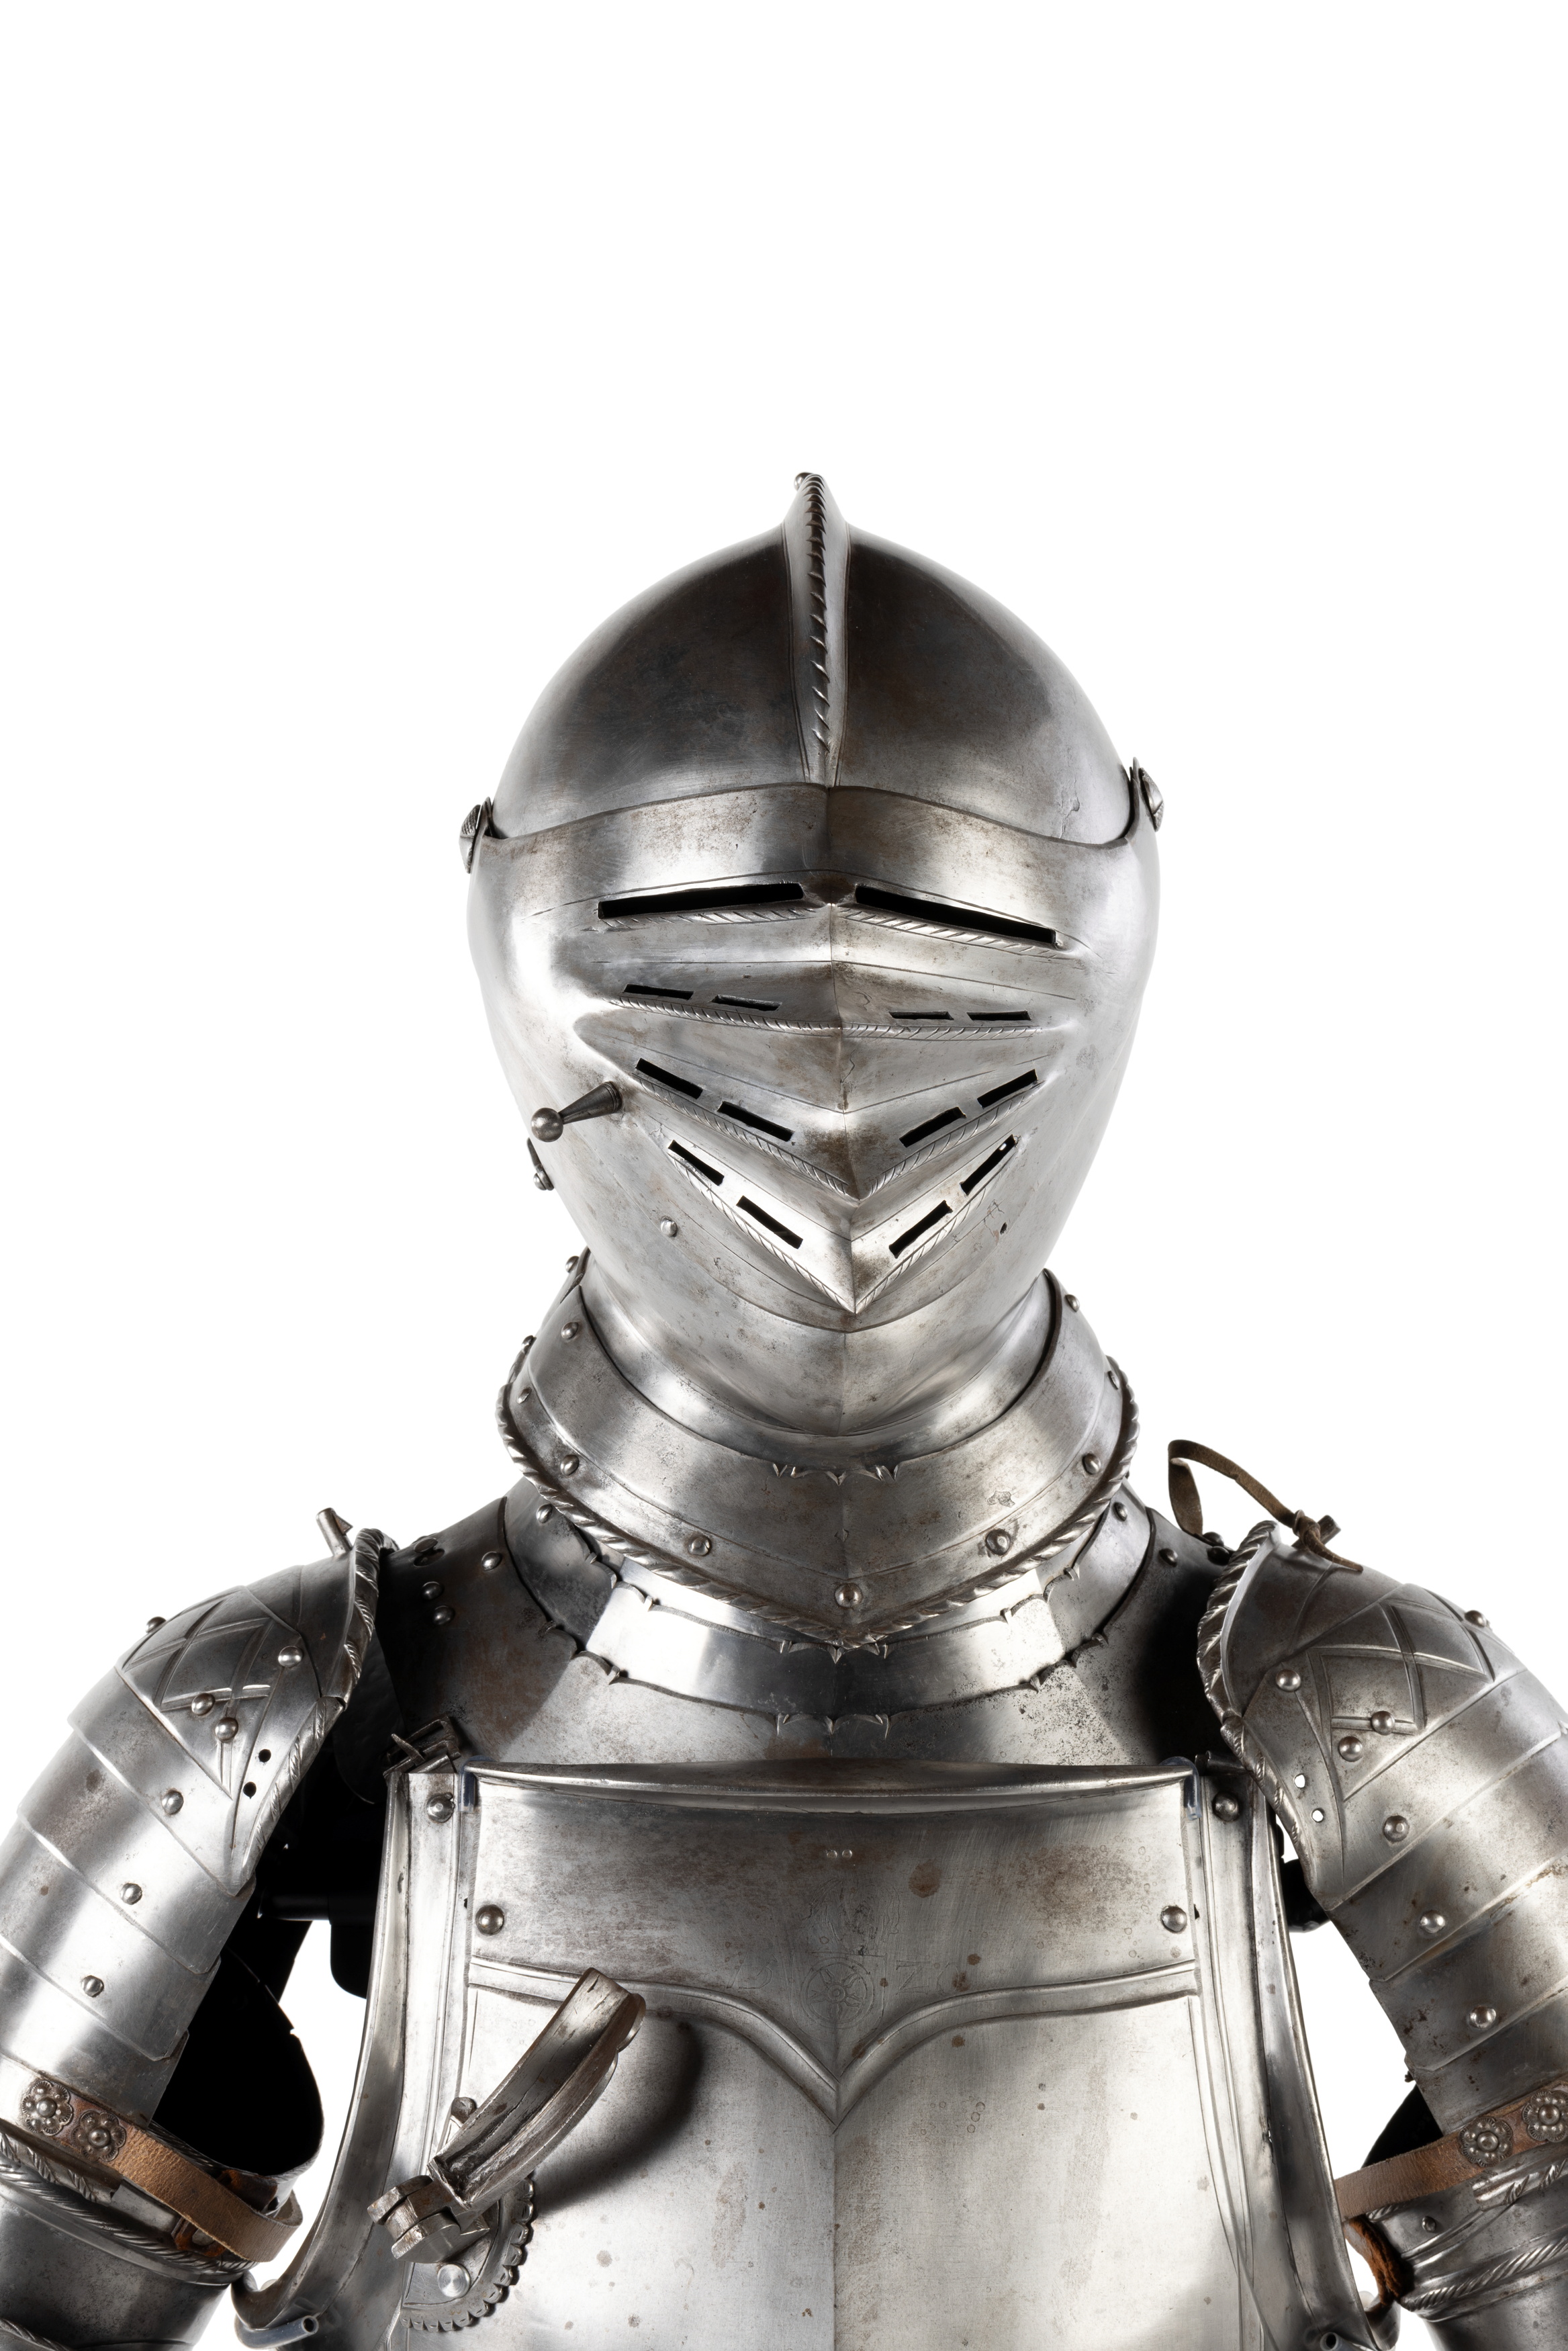 16th century armour with reproduction pieces made by Raymond Bartell